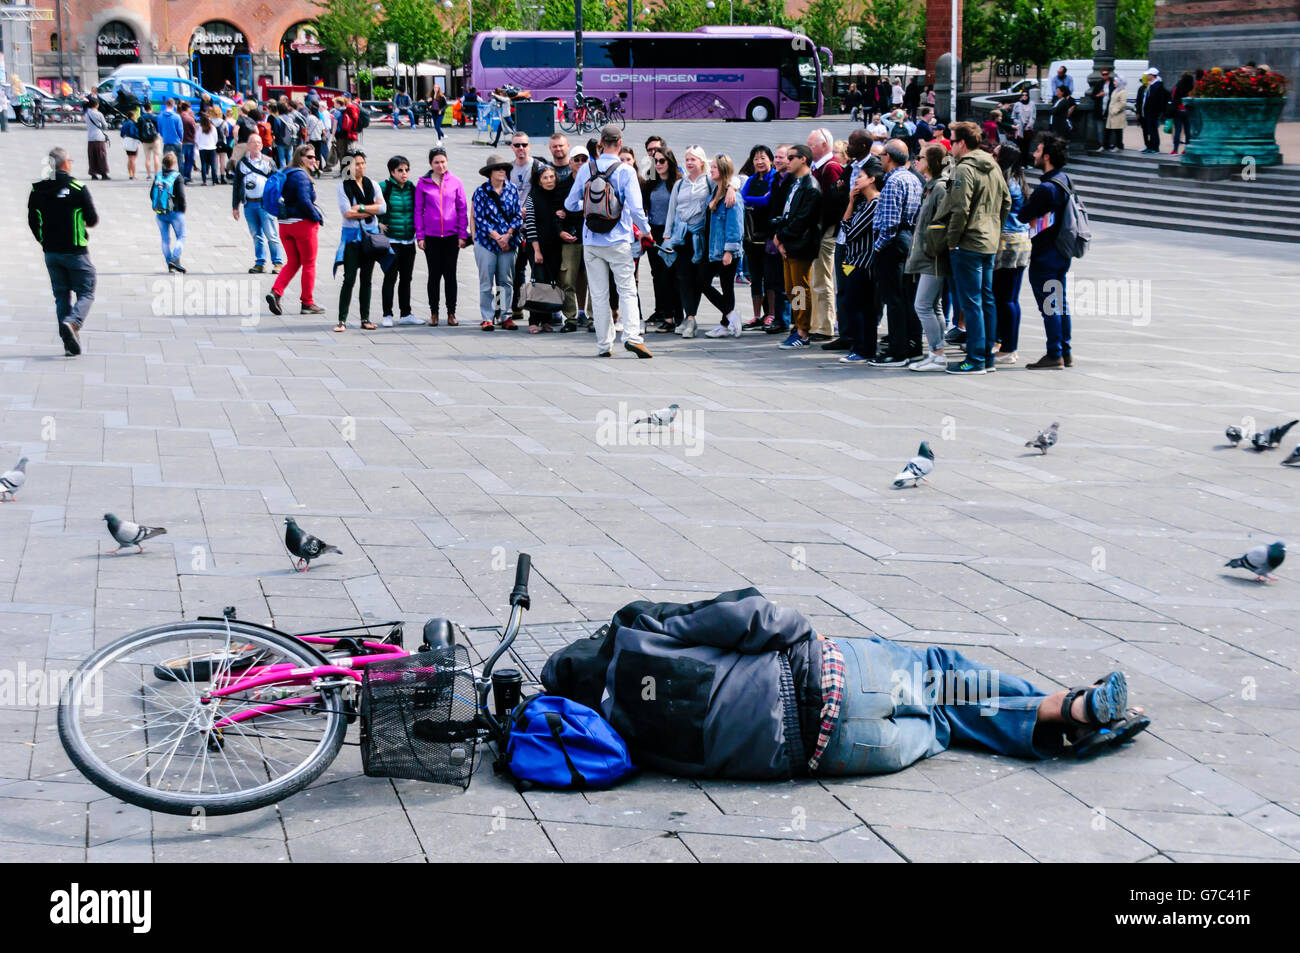 A drunk man sleeps in a public square beside his bicycle, as a group of tourists look on in Copenhagen, Denmark Stock Photo